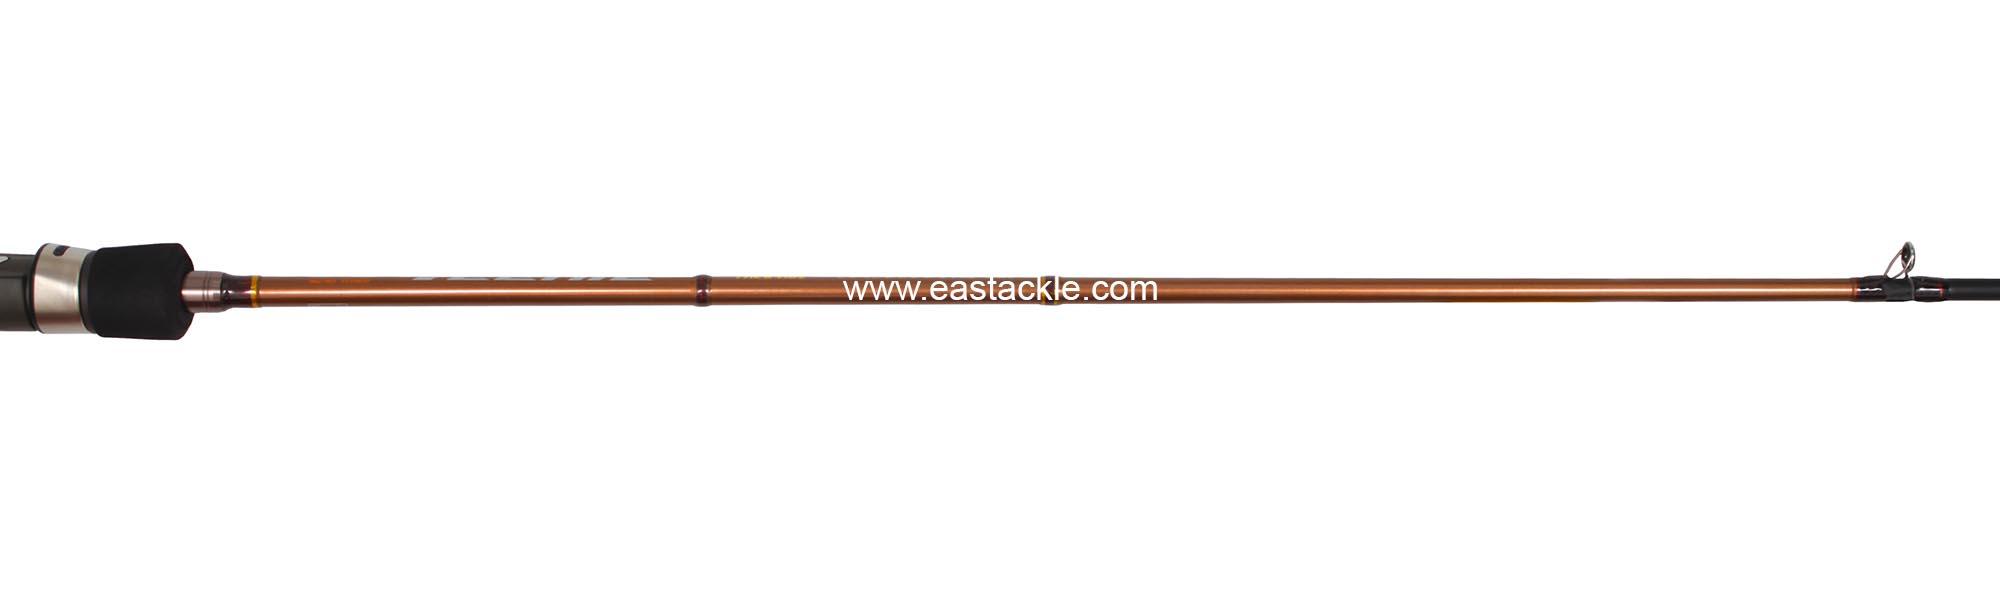 Storm - Teenie - TNC641UL - Bait Casting Rod - Reel Seat Fore Grip to Stripper Guide (Side View) | Eastackle